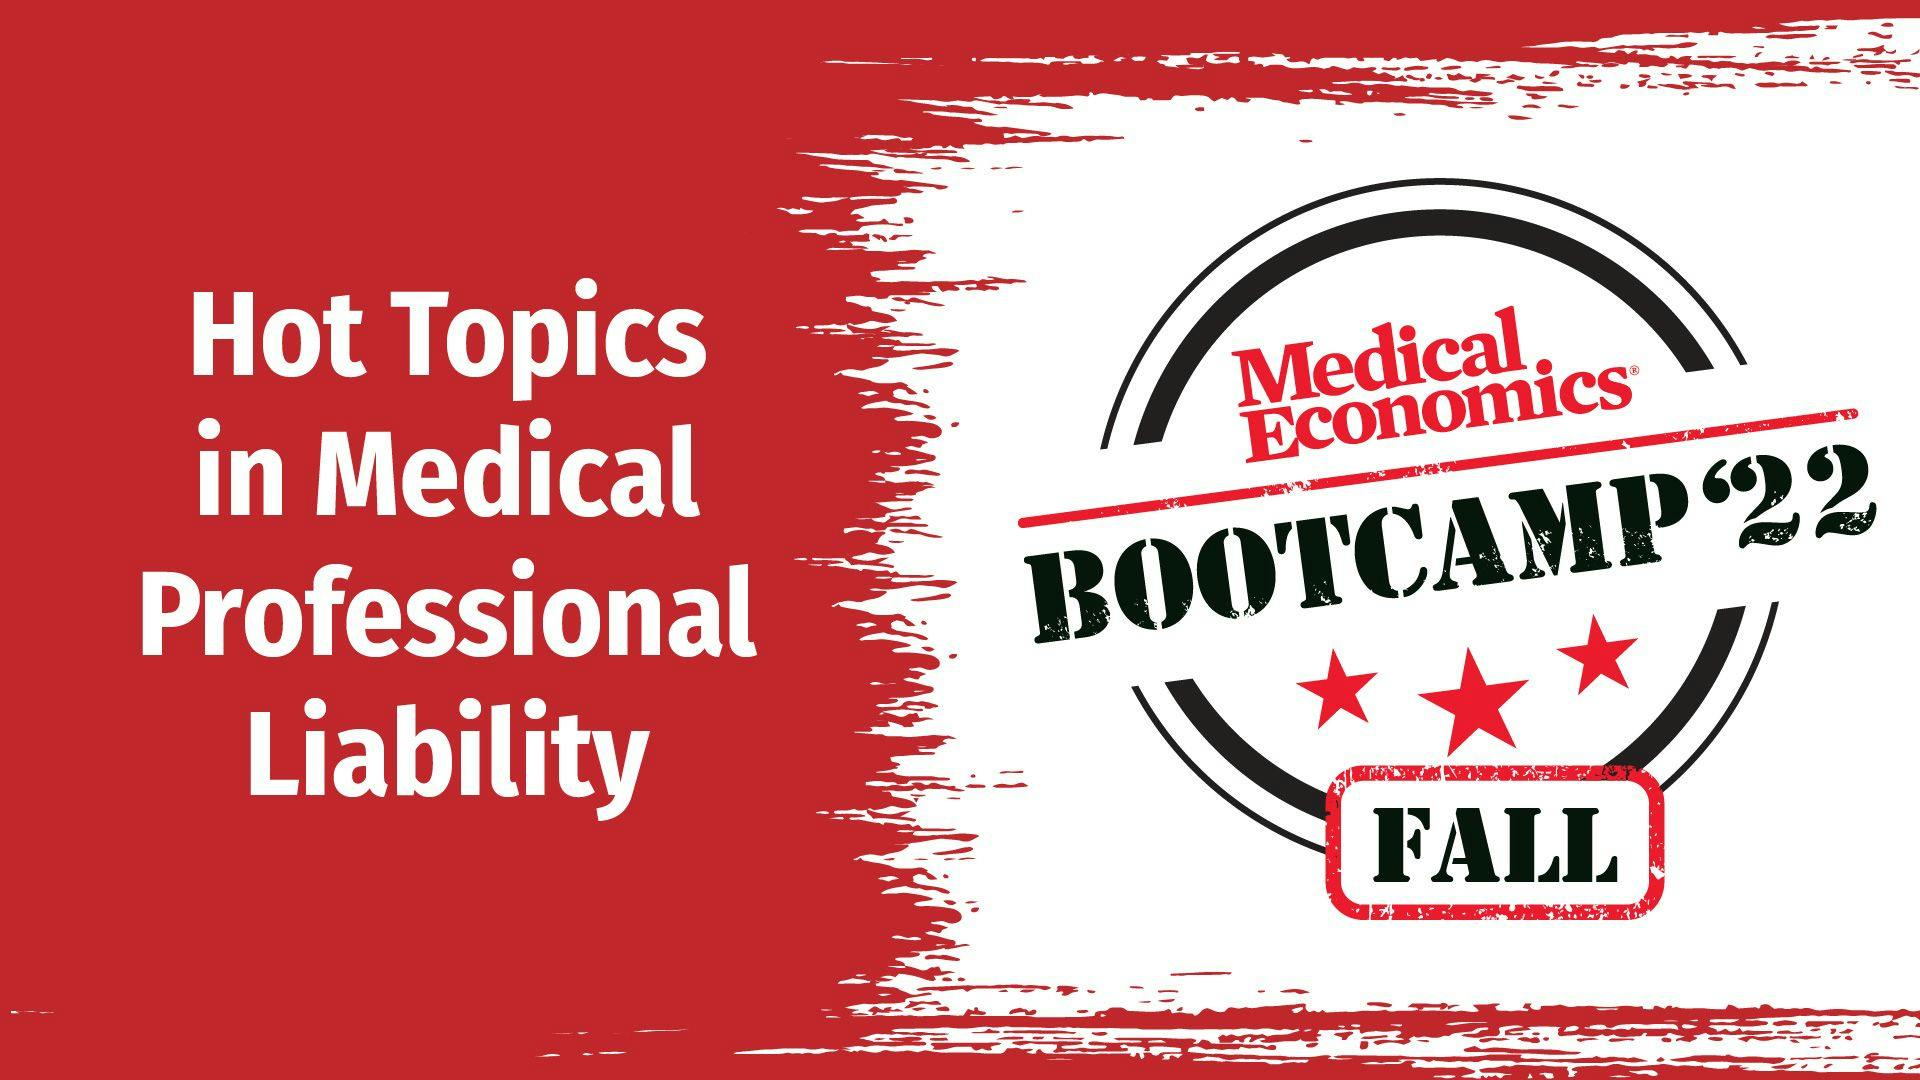 Hot topics in medical professional liability